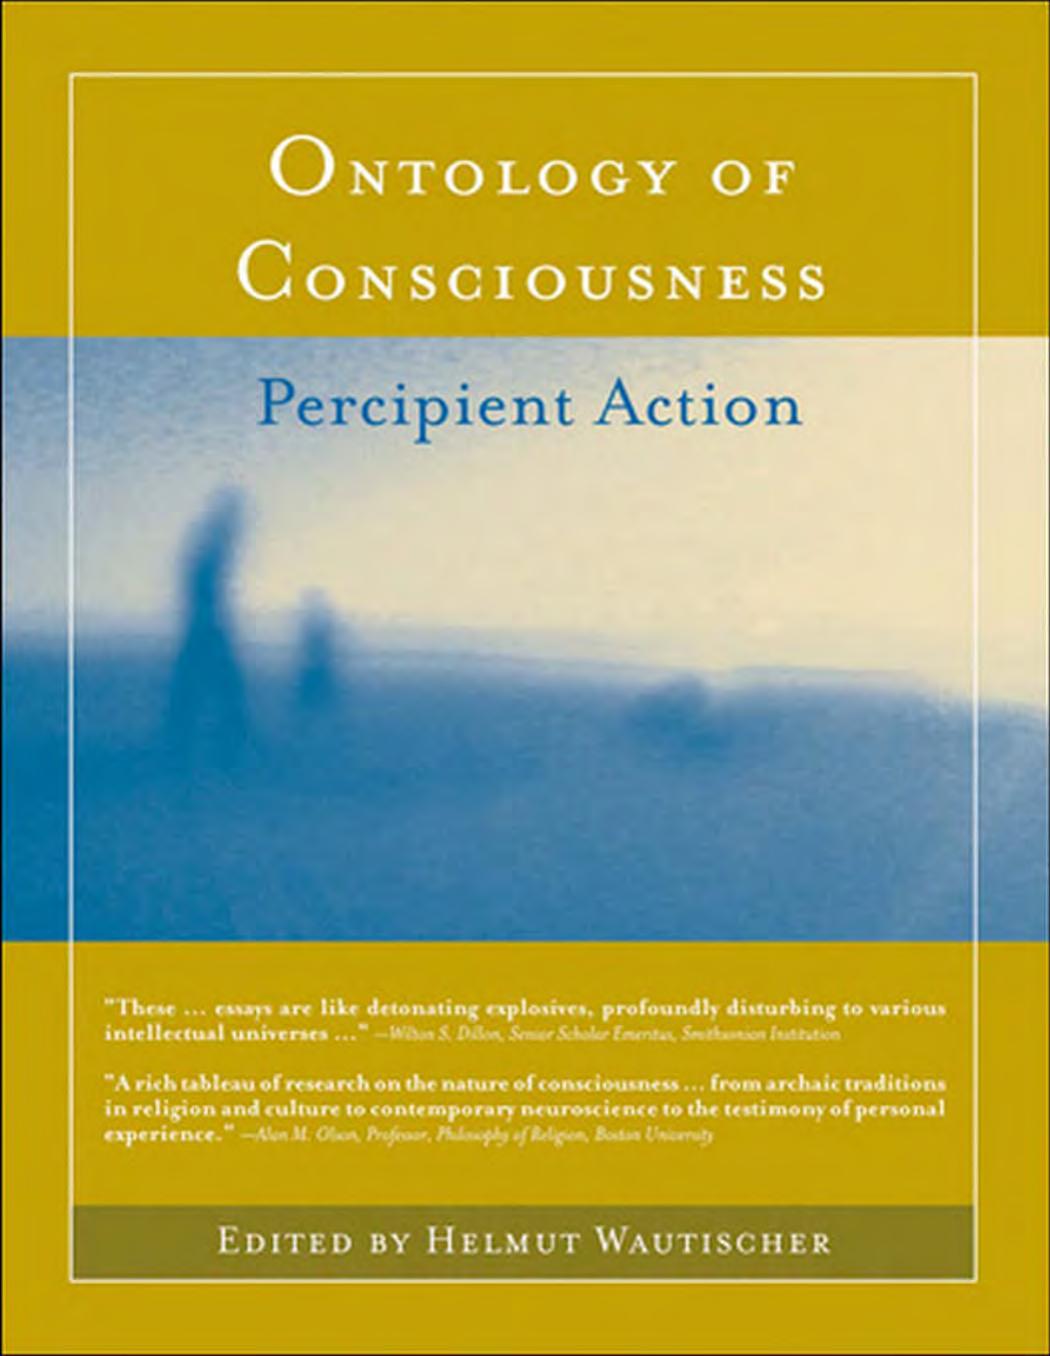 Ontology of Consciousness: Percipient Action